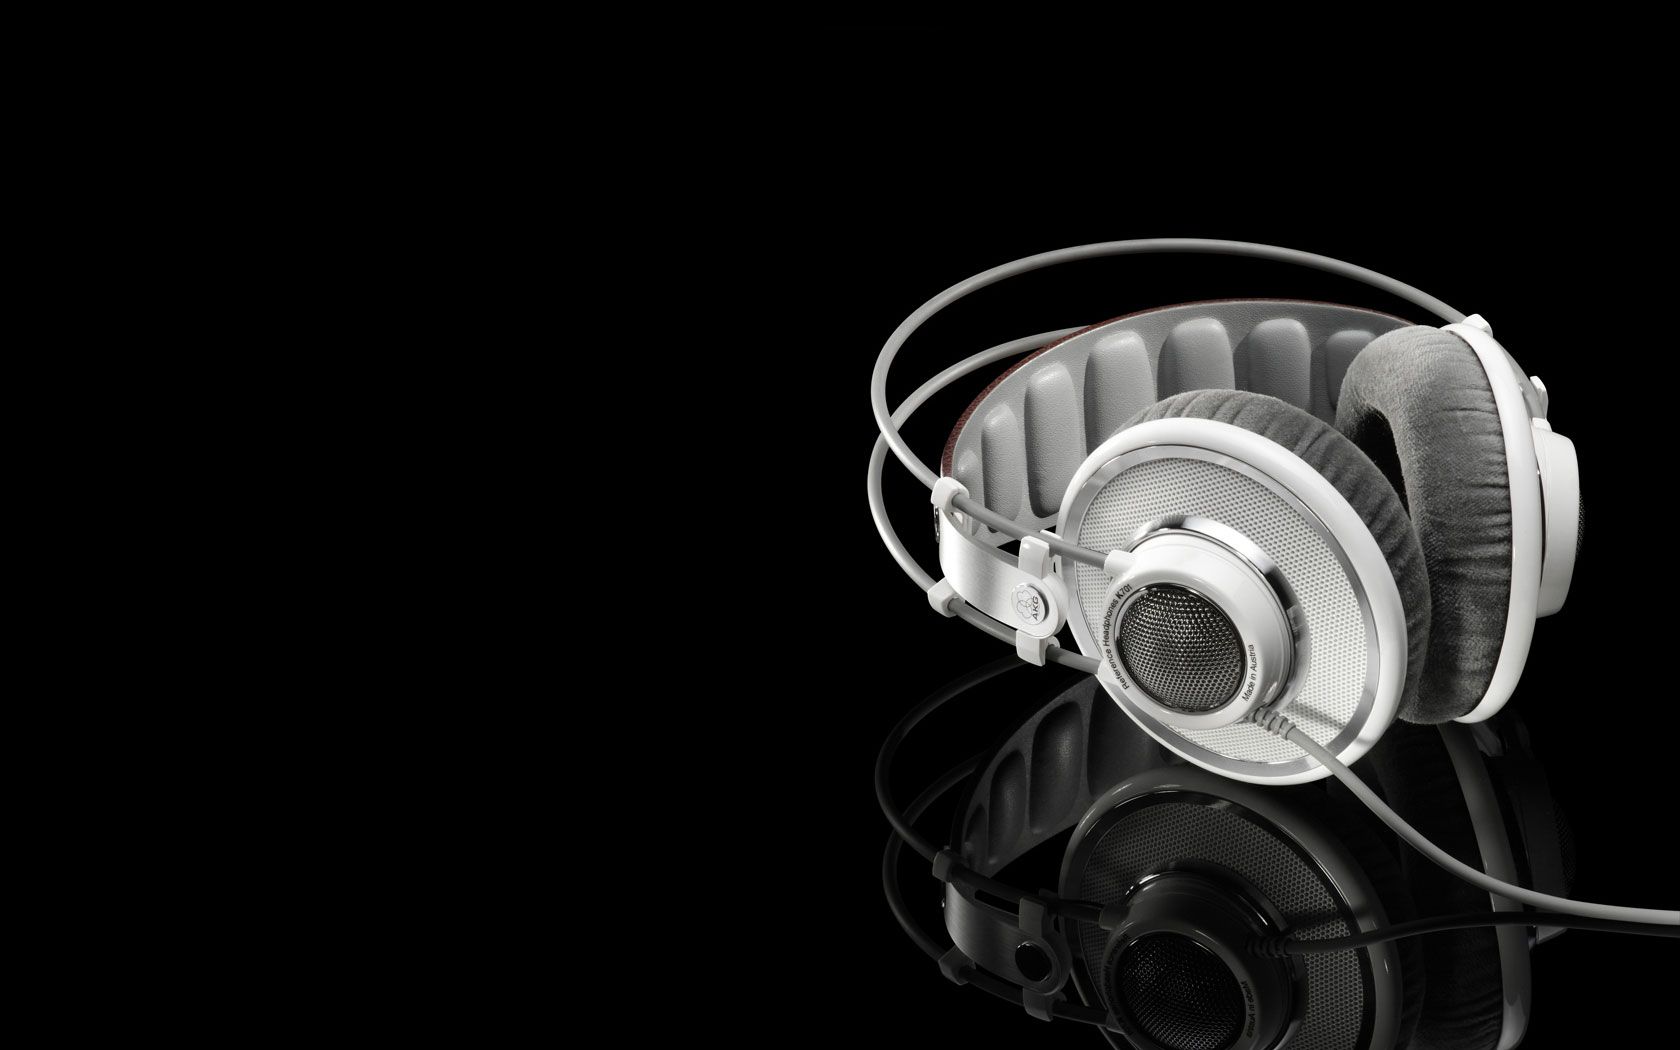 Awesome Headphone Music Image 3d Abstract Headphones